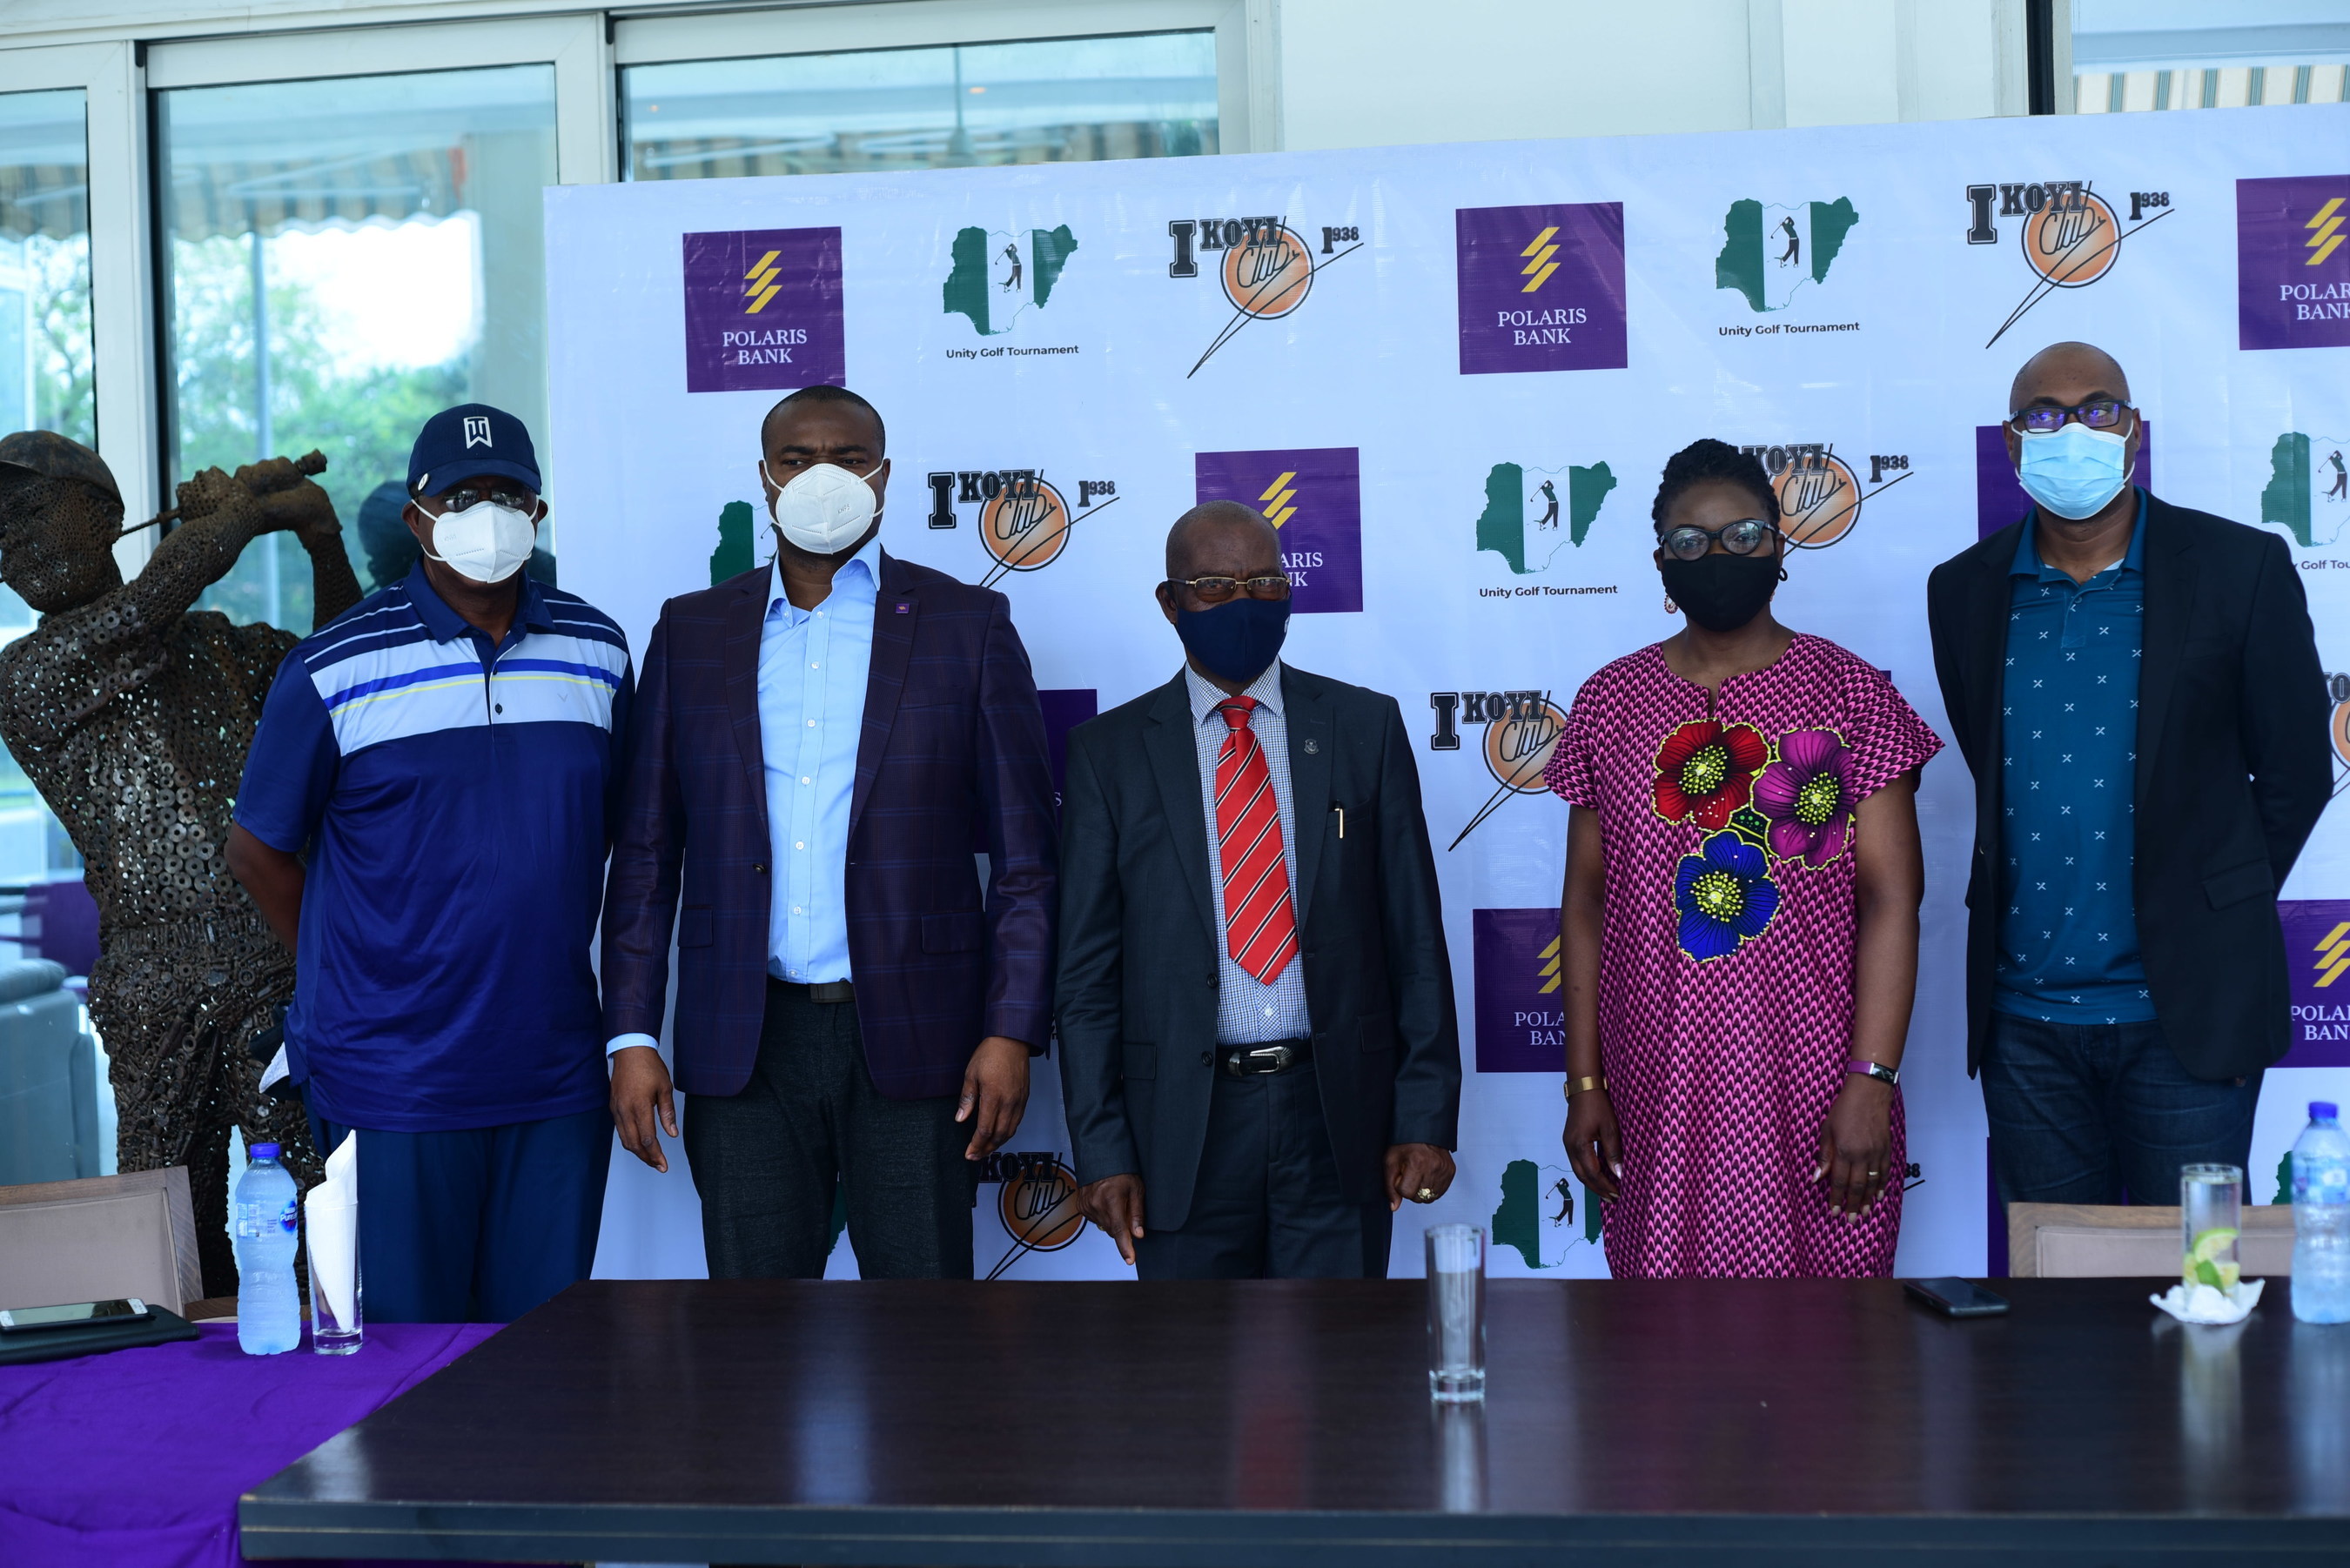 L-R: Dr. Anthony Oboh, Vice Chairman, Golf Section, Ikoyi Club 1938, Nduneche Ezurike, Head, Strategic Brand Management, Polaris Bank, Dr. M.I Okoro, Captain, Golf Section, Ikoyi Club 1938; Bukola Oluyadi, Acting Group Head, Customer Value Management & Strategic Communication, Polaris Band & Peter Eben-Spiff, Organizing Committee Chair, at the pre-Unity Golf Tournament media briefing sponsored by Polaris Bank & held at Ikoyi Club (Golf section) at the weekend.